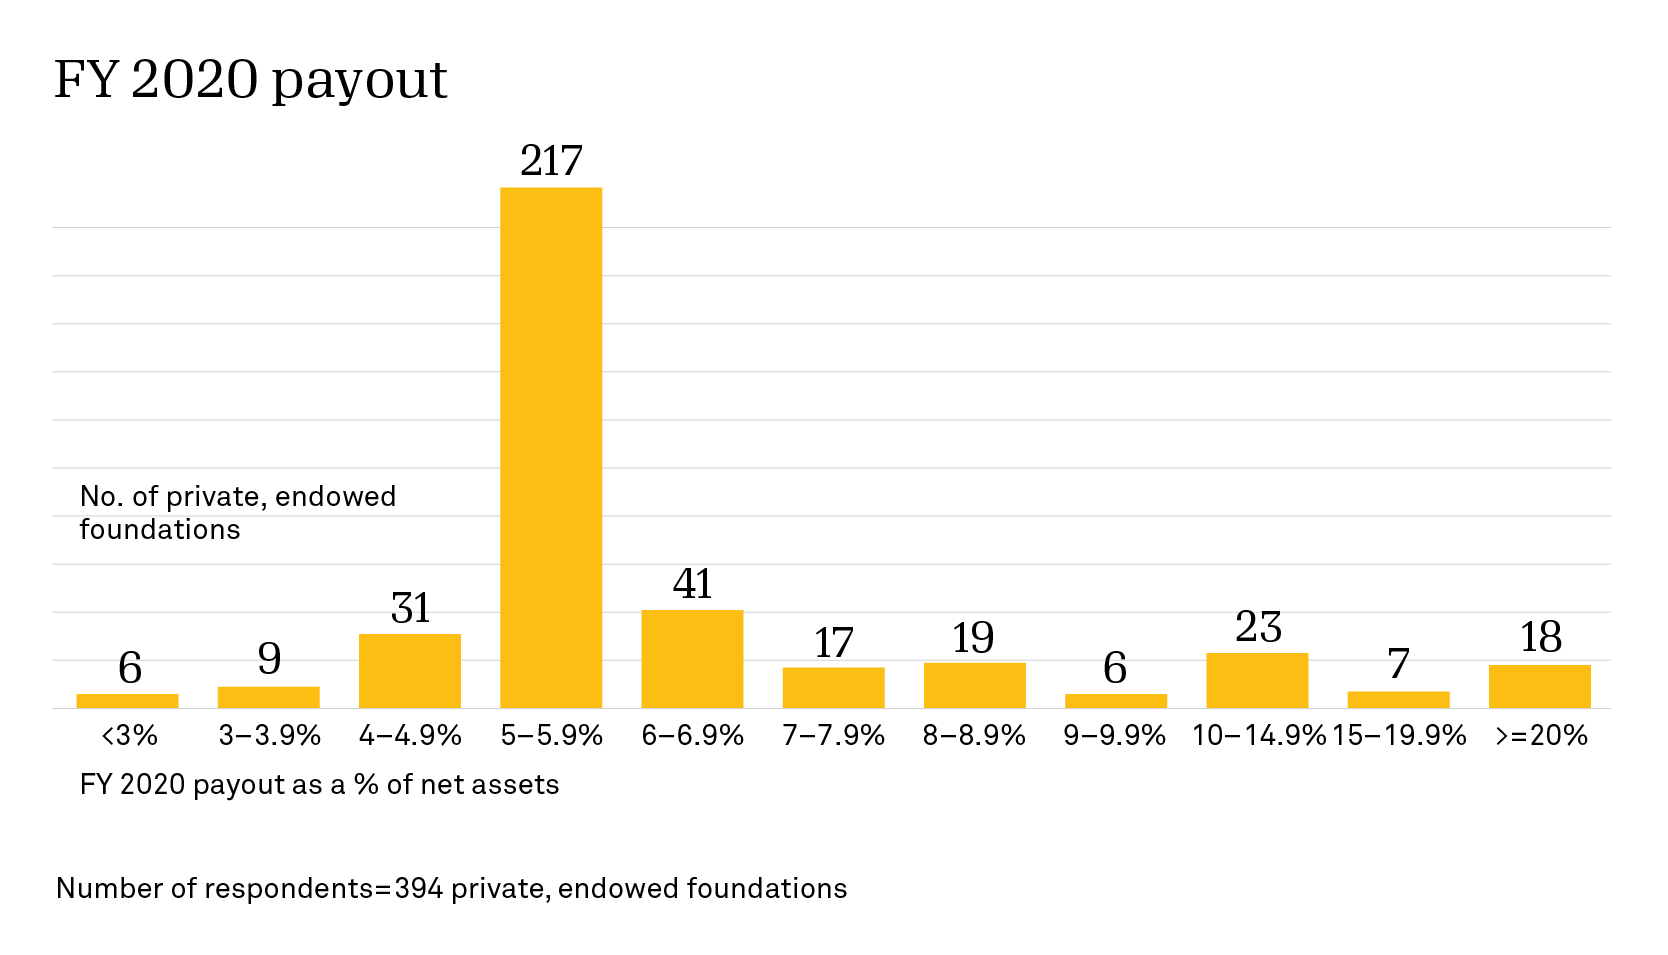 Bar graph of FY 2020 payout as a percentage of net assets by number of private, endowed foundations